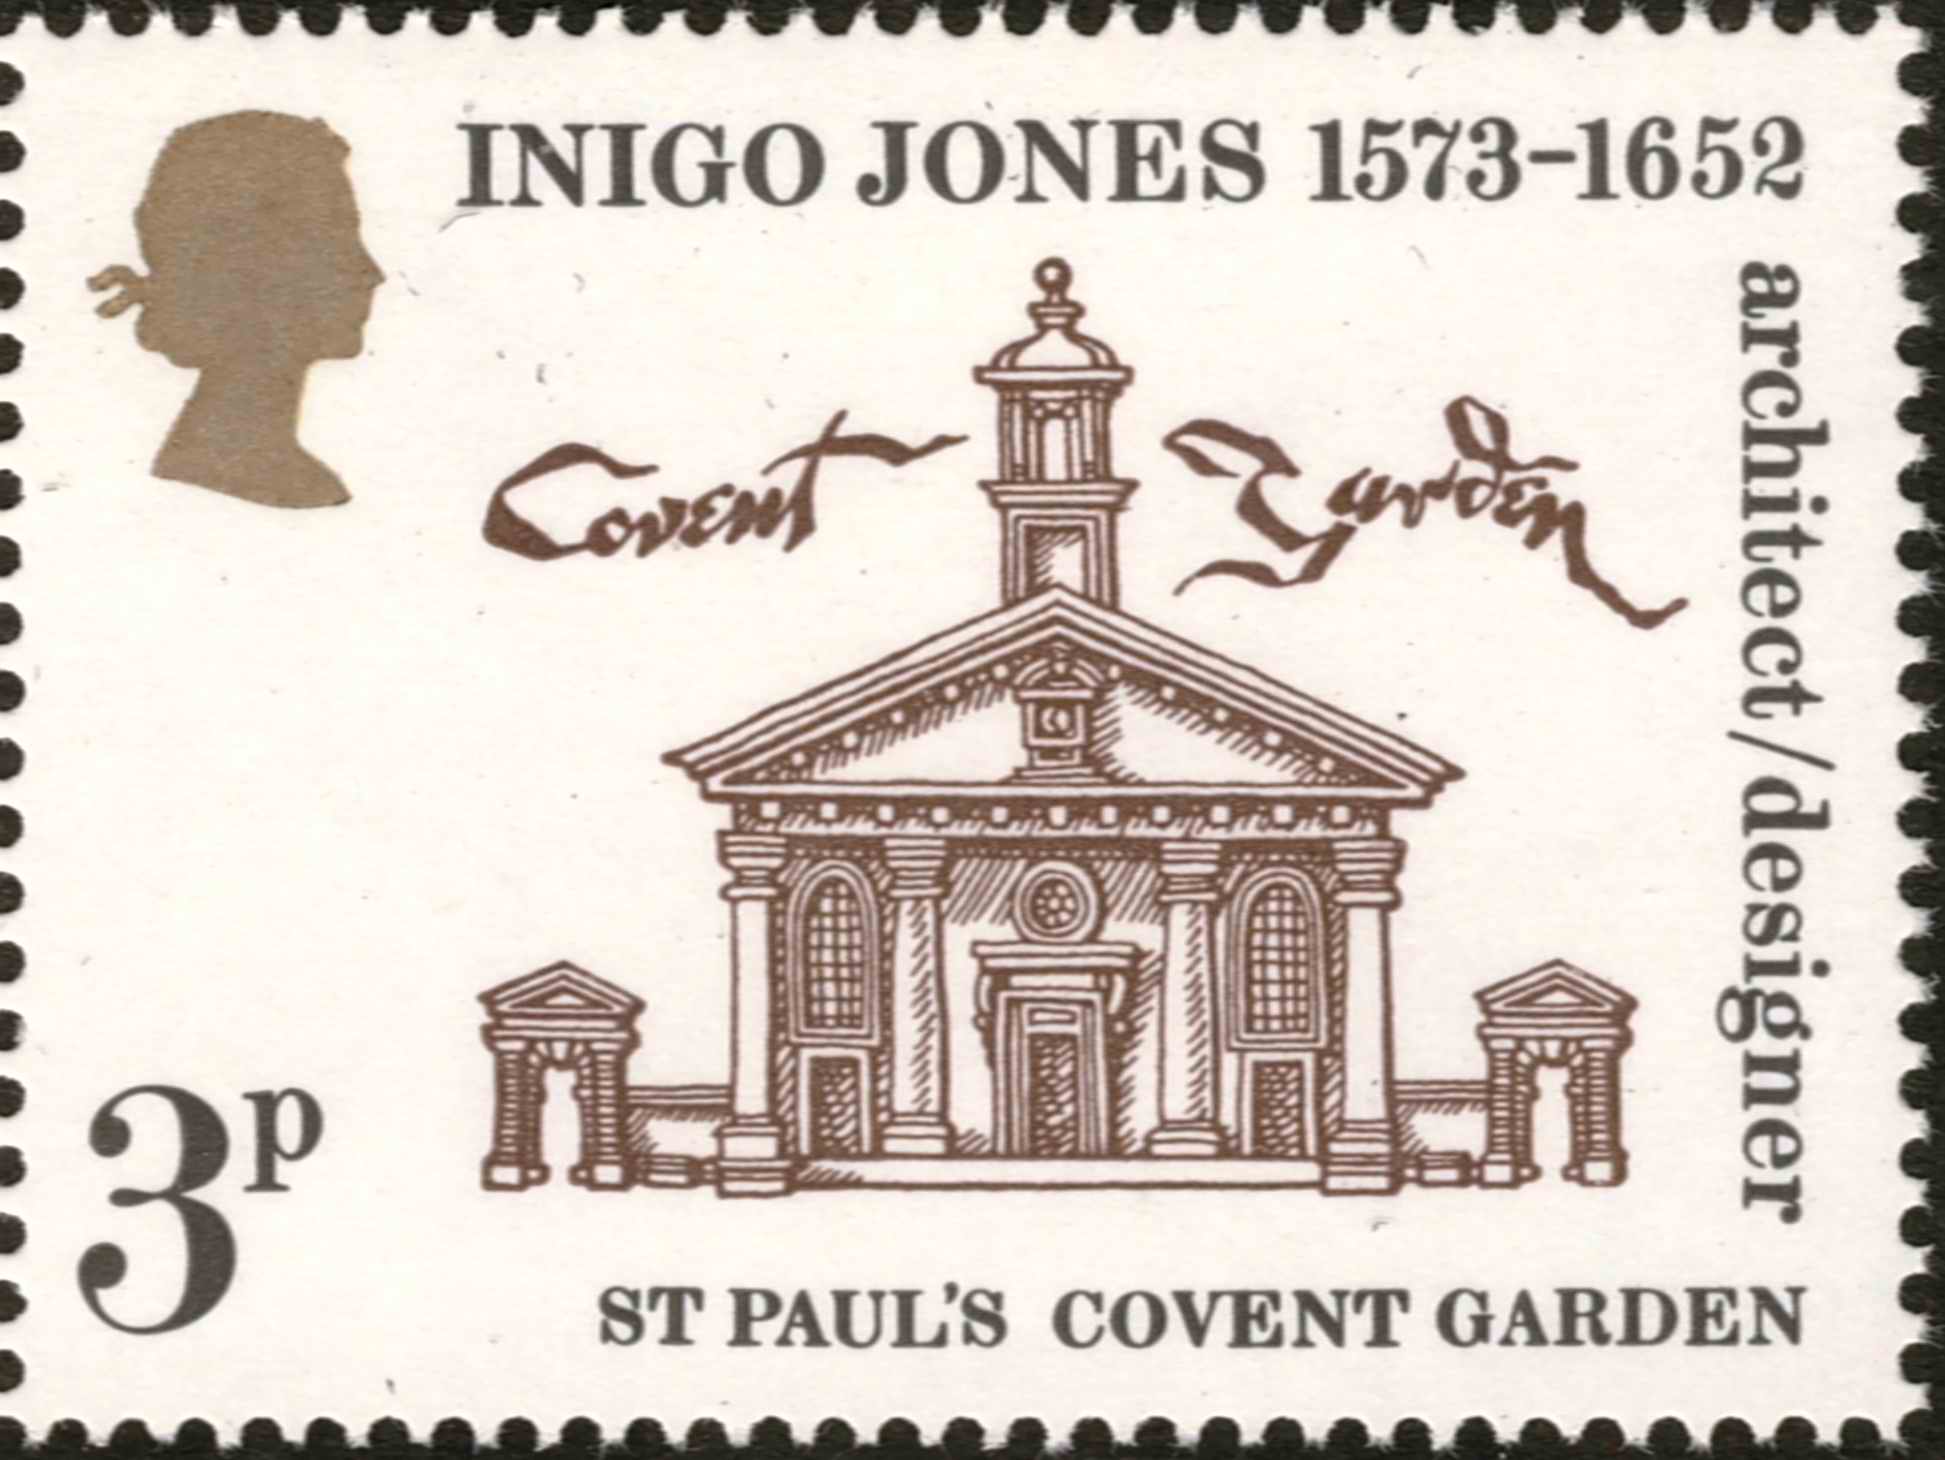 St Paul's, Covent Garden on stamp